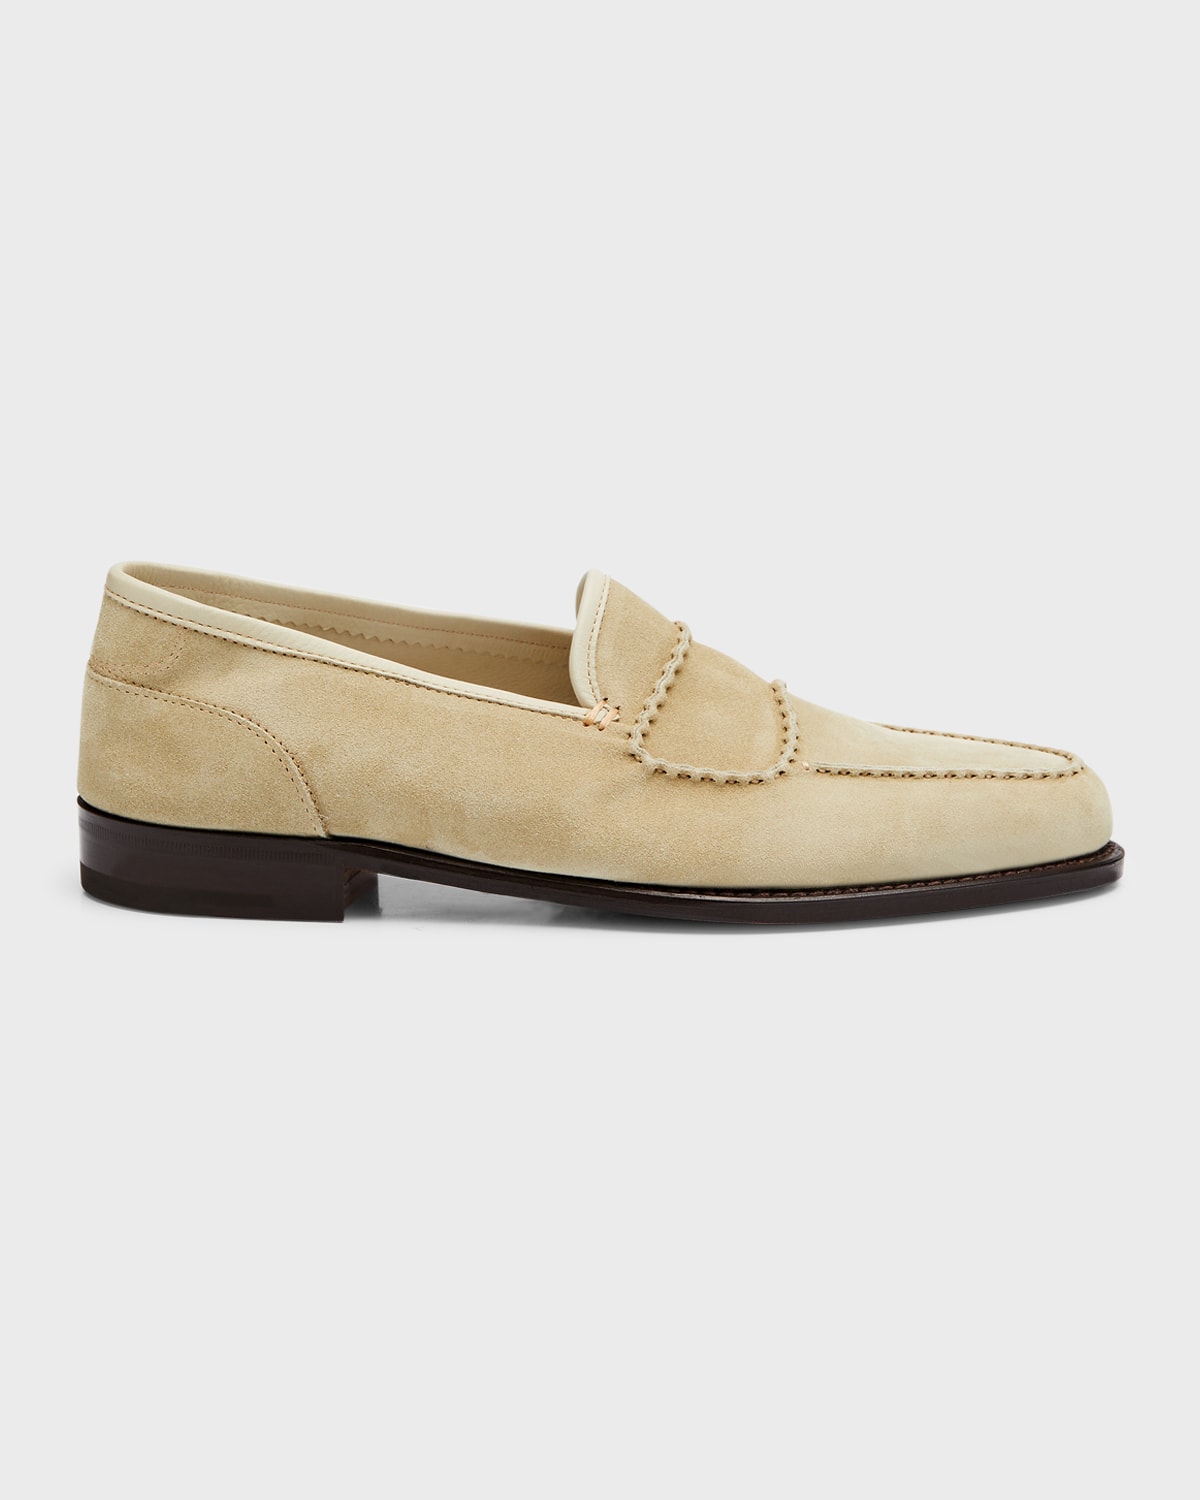 TOM FORD Men's Sean Twisted Keeper Suede Penny Loafers | Neiman Marcus